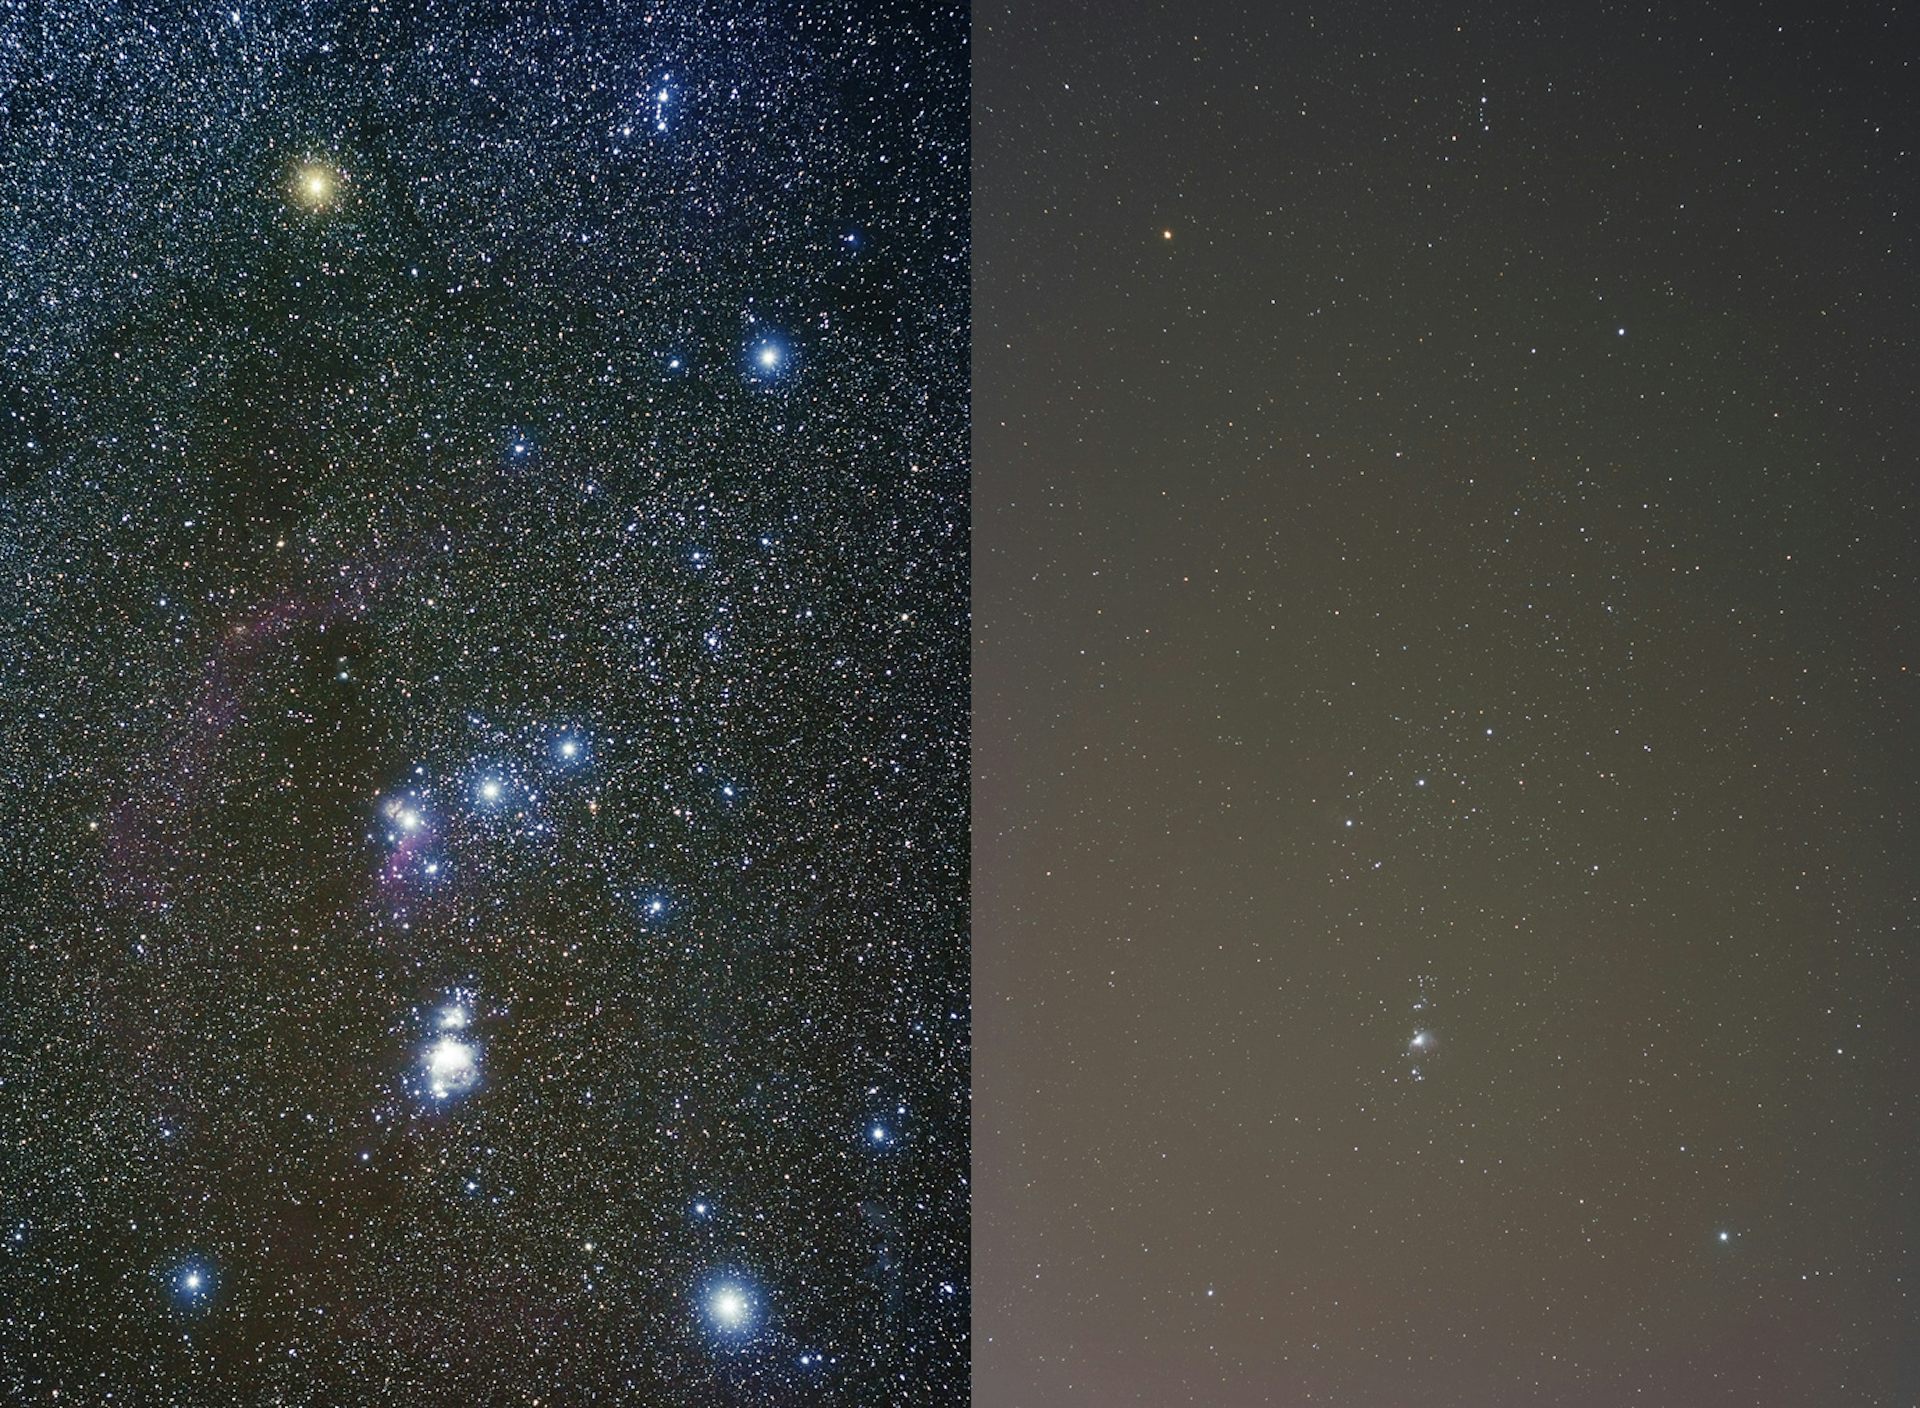 Two pictures of the constellation Orion with one showing many times more stars.